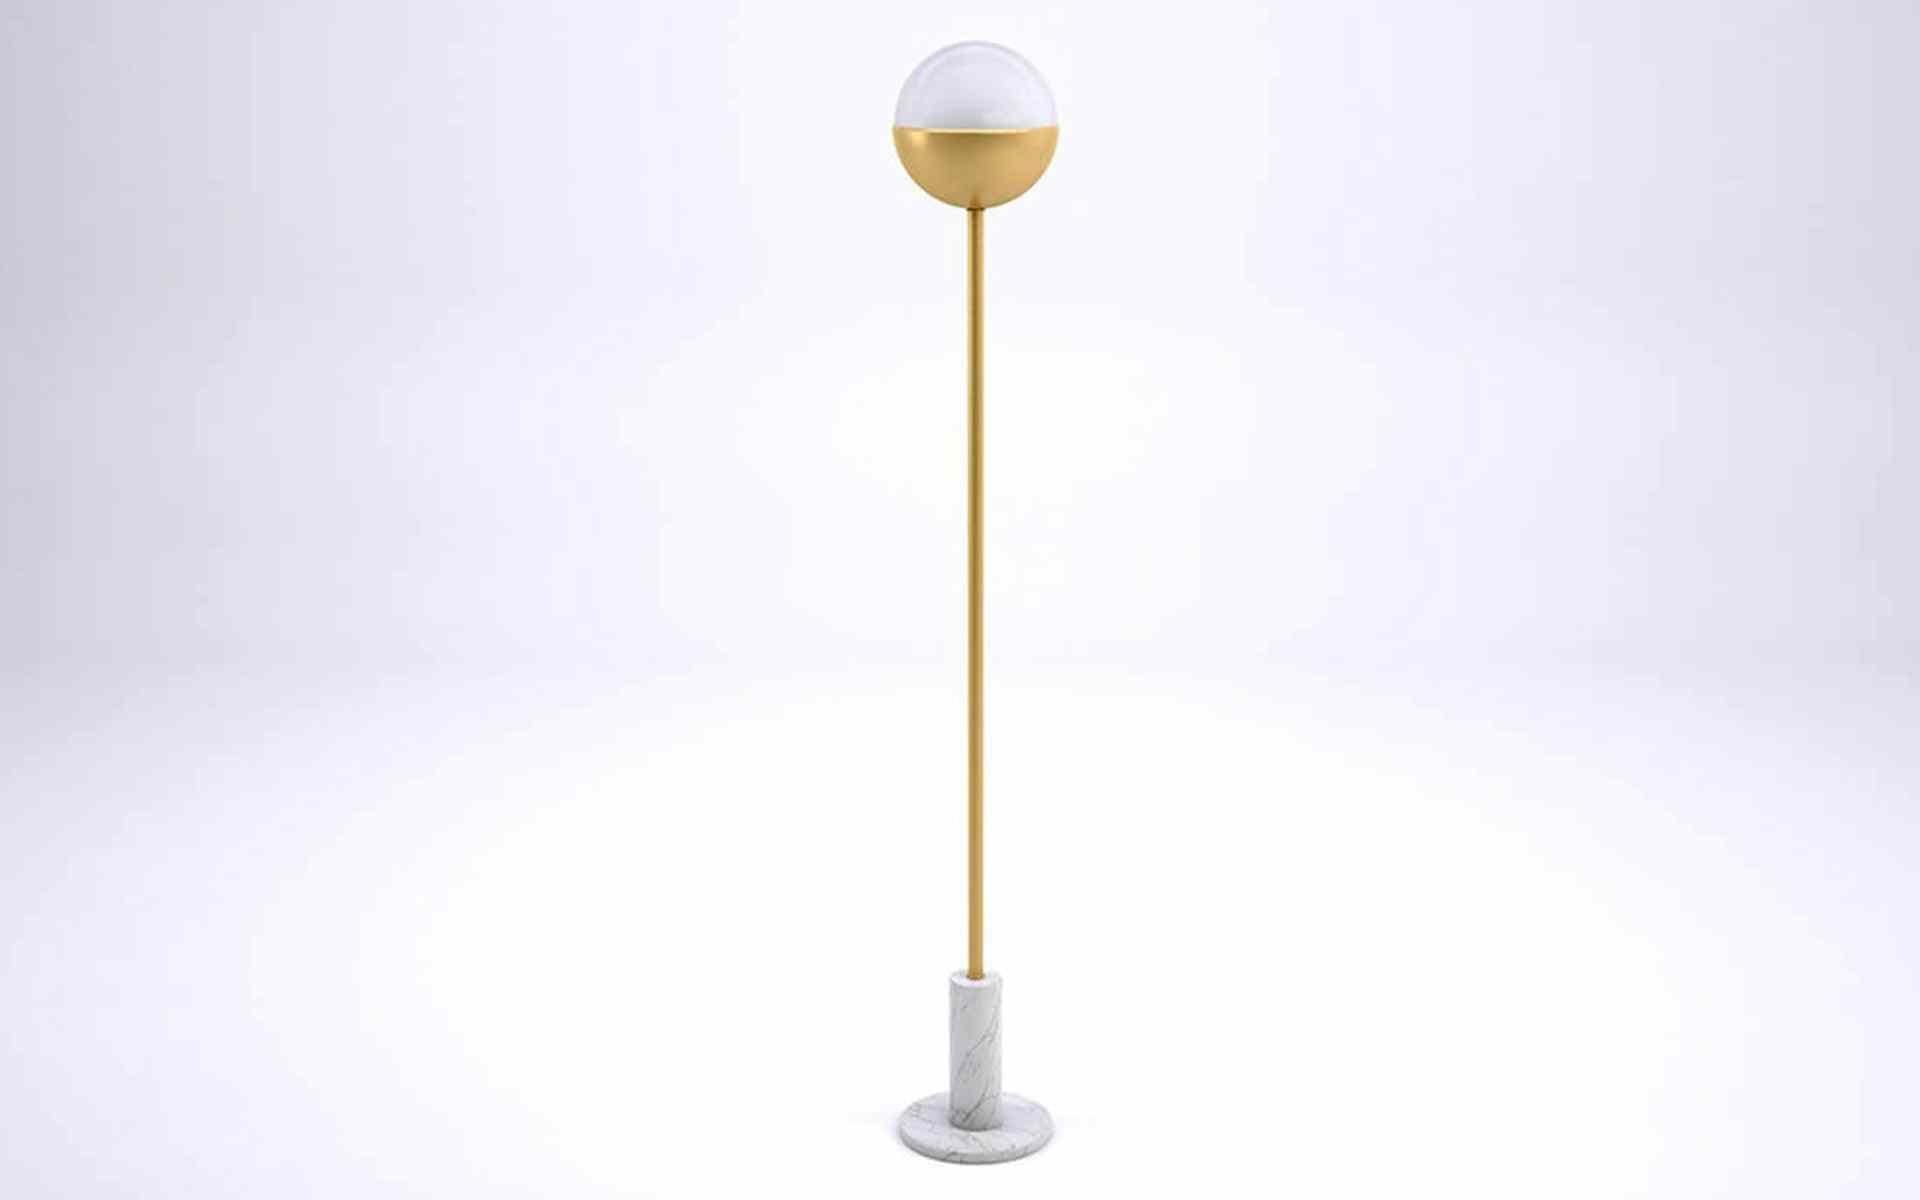 The round form of the marble and brass combination brings the symbol of the universe to places, while the FAMED lamb provides peace with the light of the axle.

Diameter: 26 cm / 10.2 inch
Height: 182 cm / 71.6 inch

Carrara Marble Leg
Brass Coated